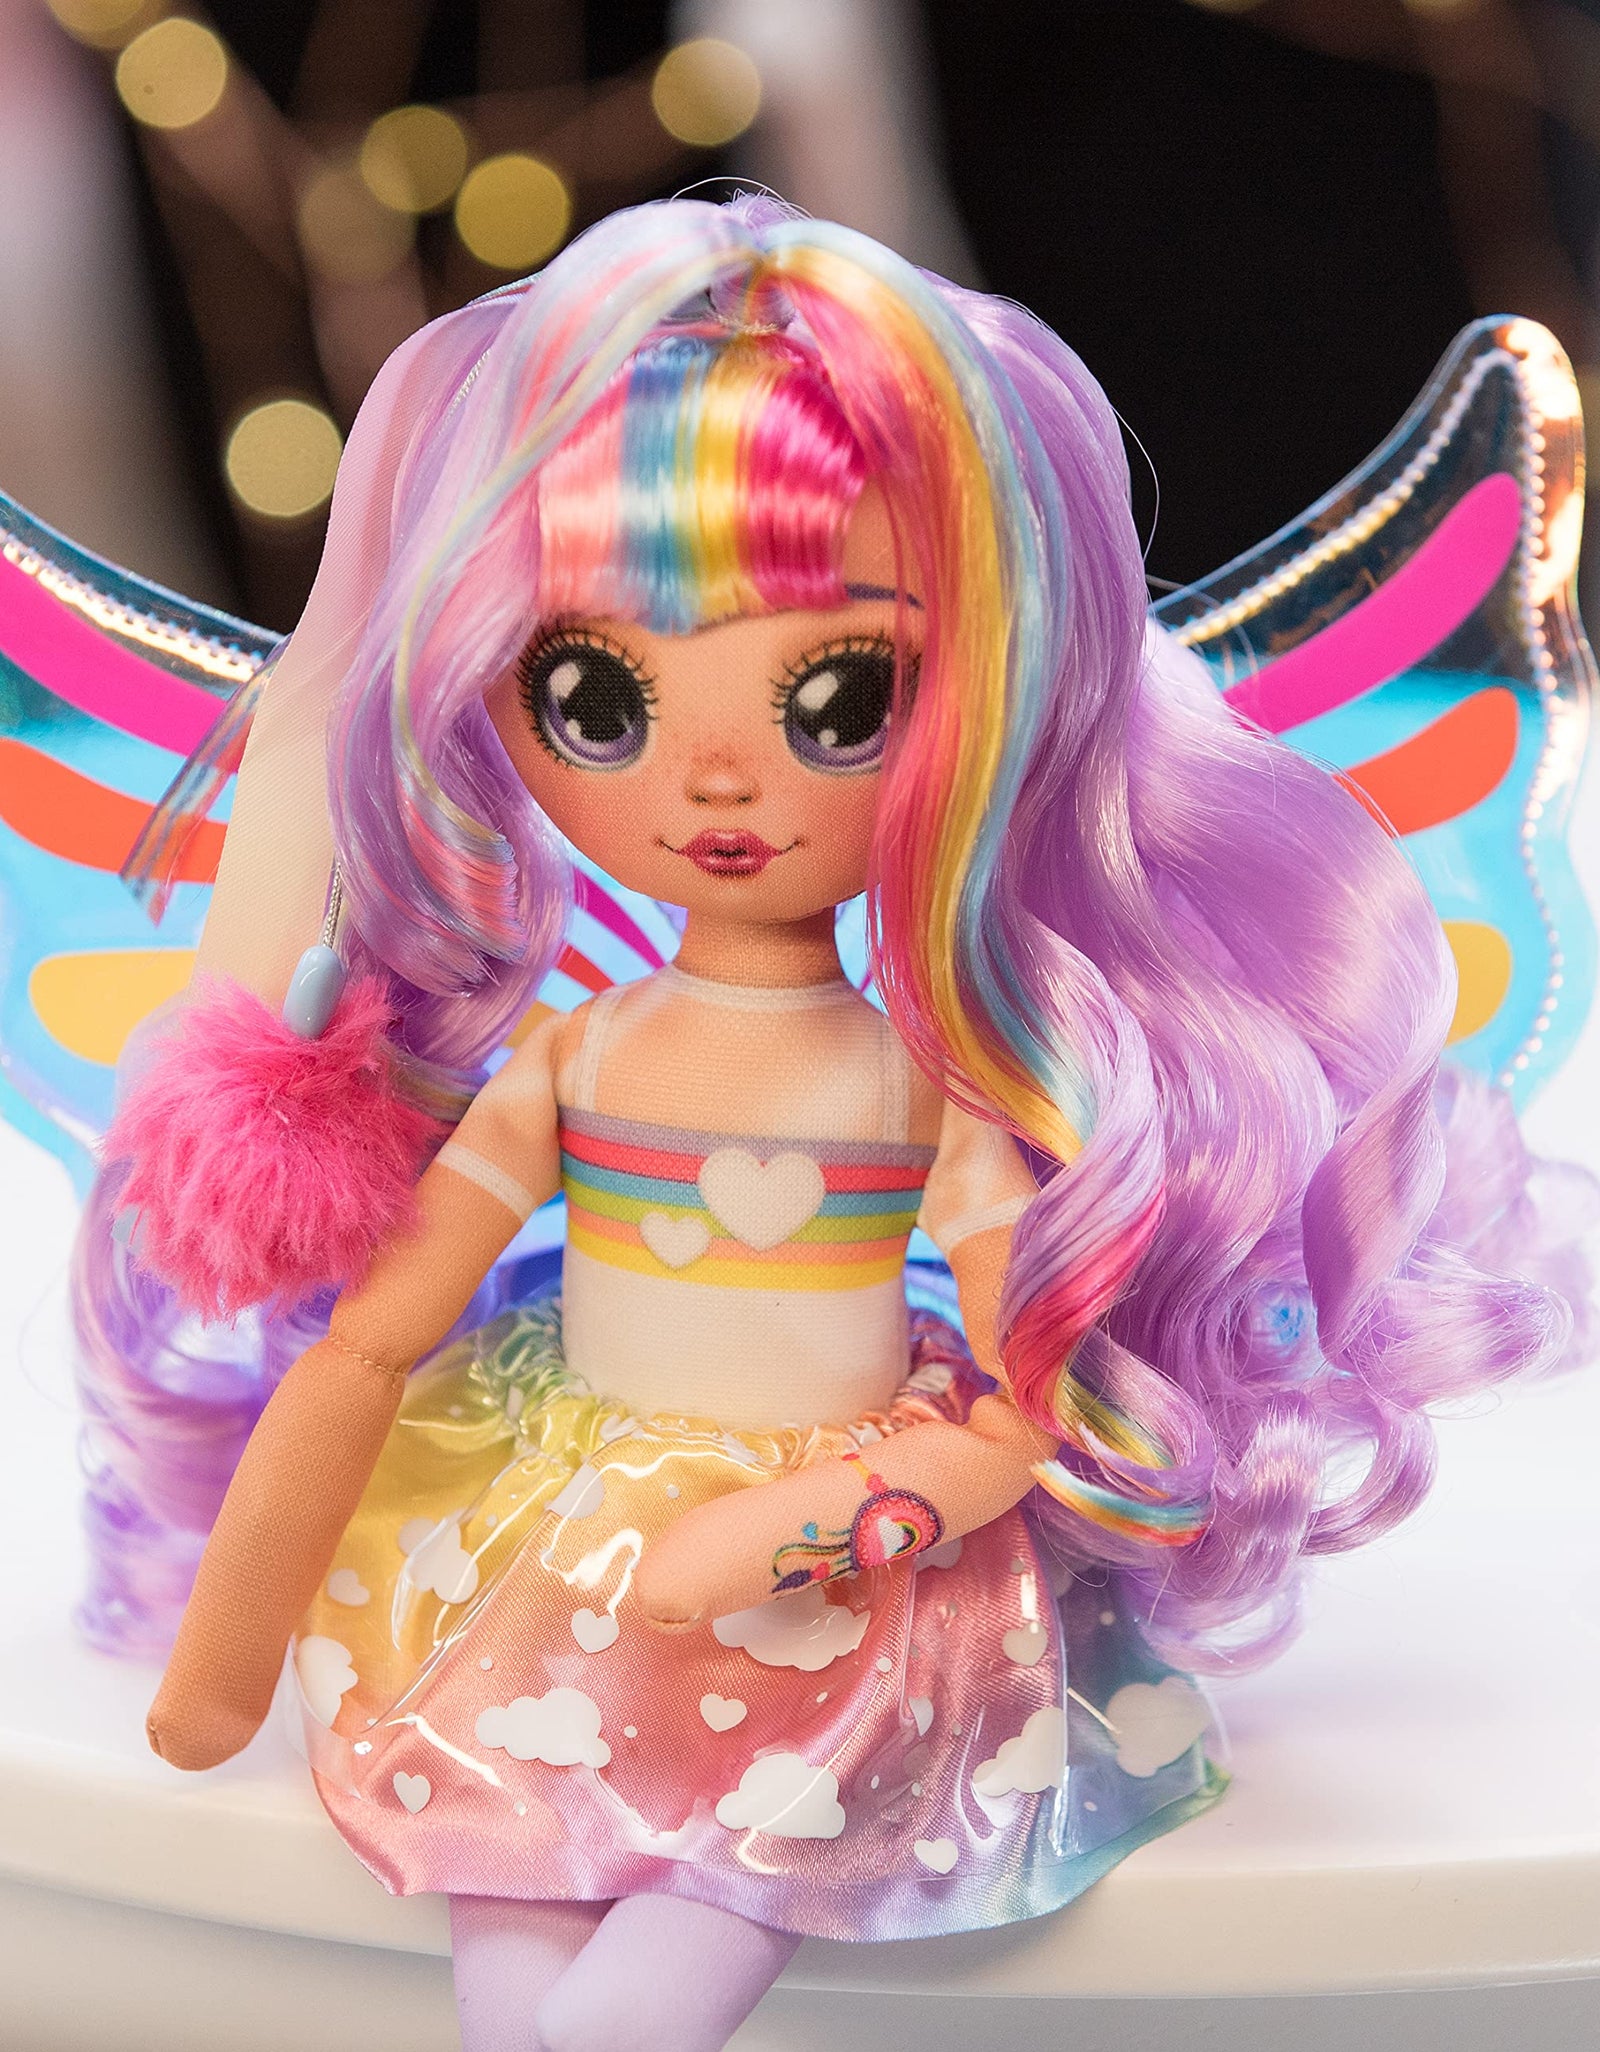 Dream Seekers Doll Single Pack – 1pc Toy | Magical Fairy Fashion Doll Hope, Multicolor (13813)